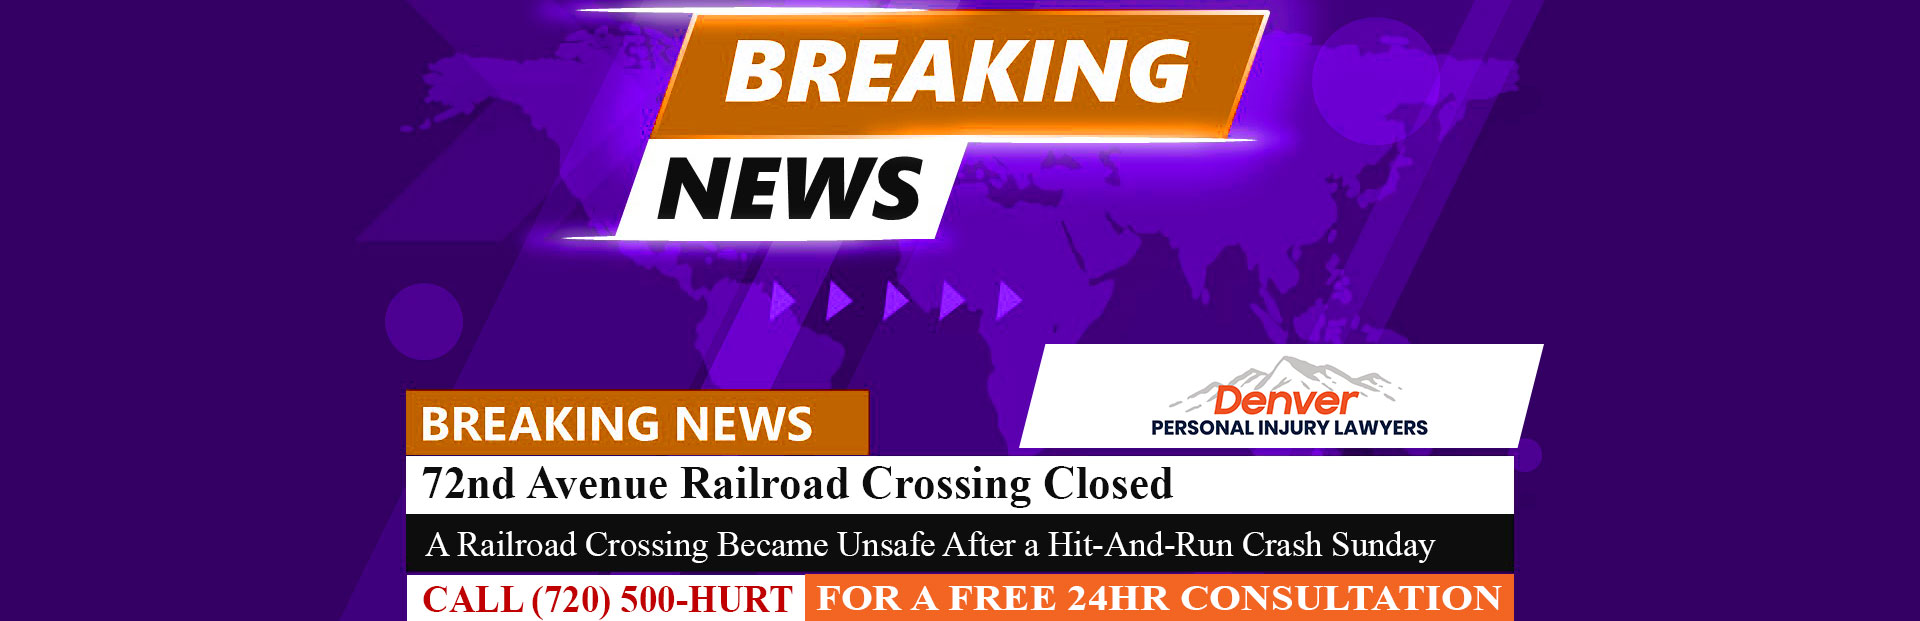 [02-13-24] 72nd Avenue Railroad Crossing Closed, ‘Unsafe’ After Hit-And-Run